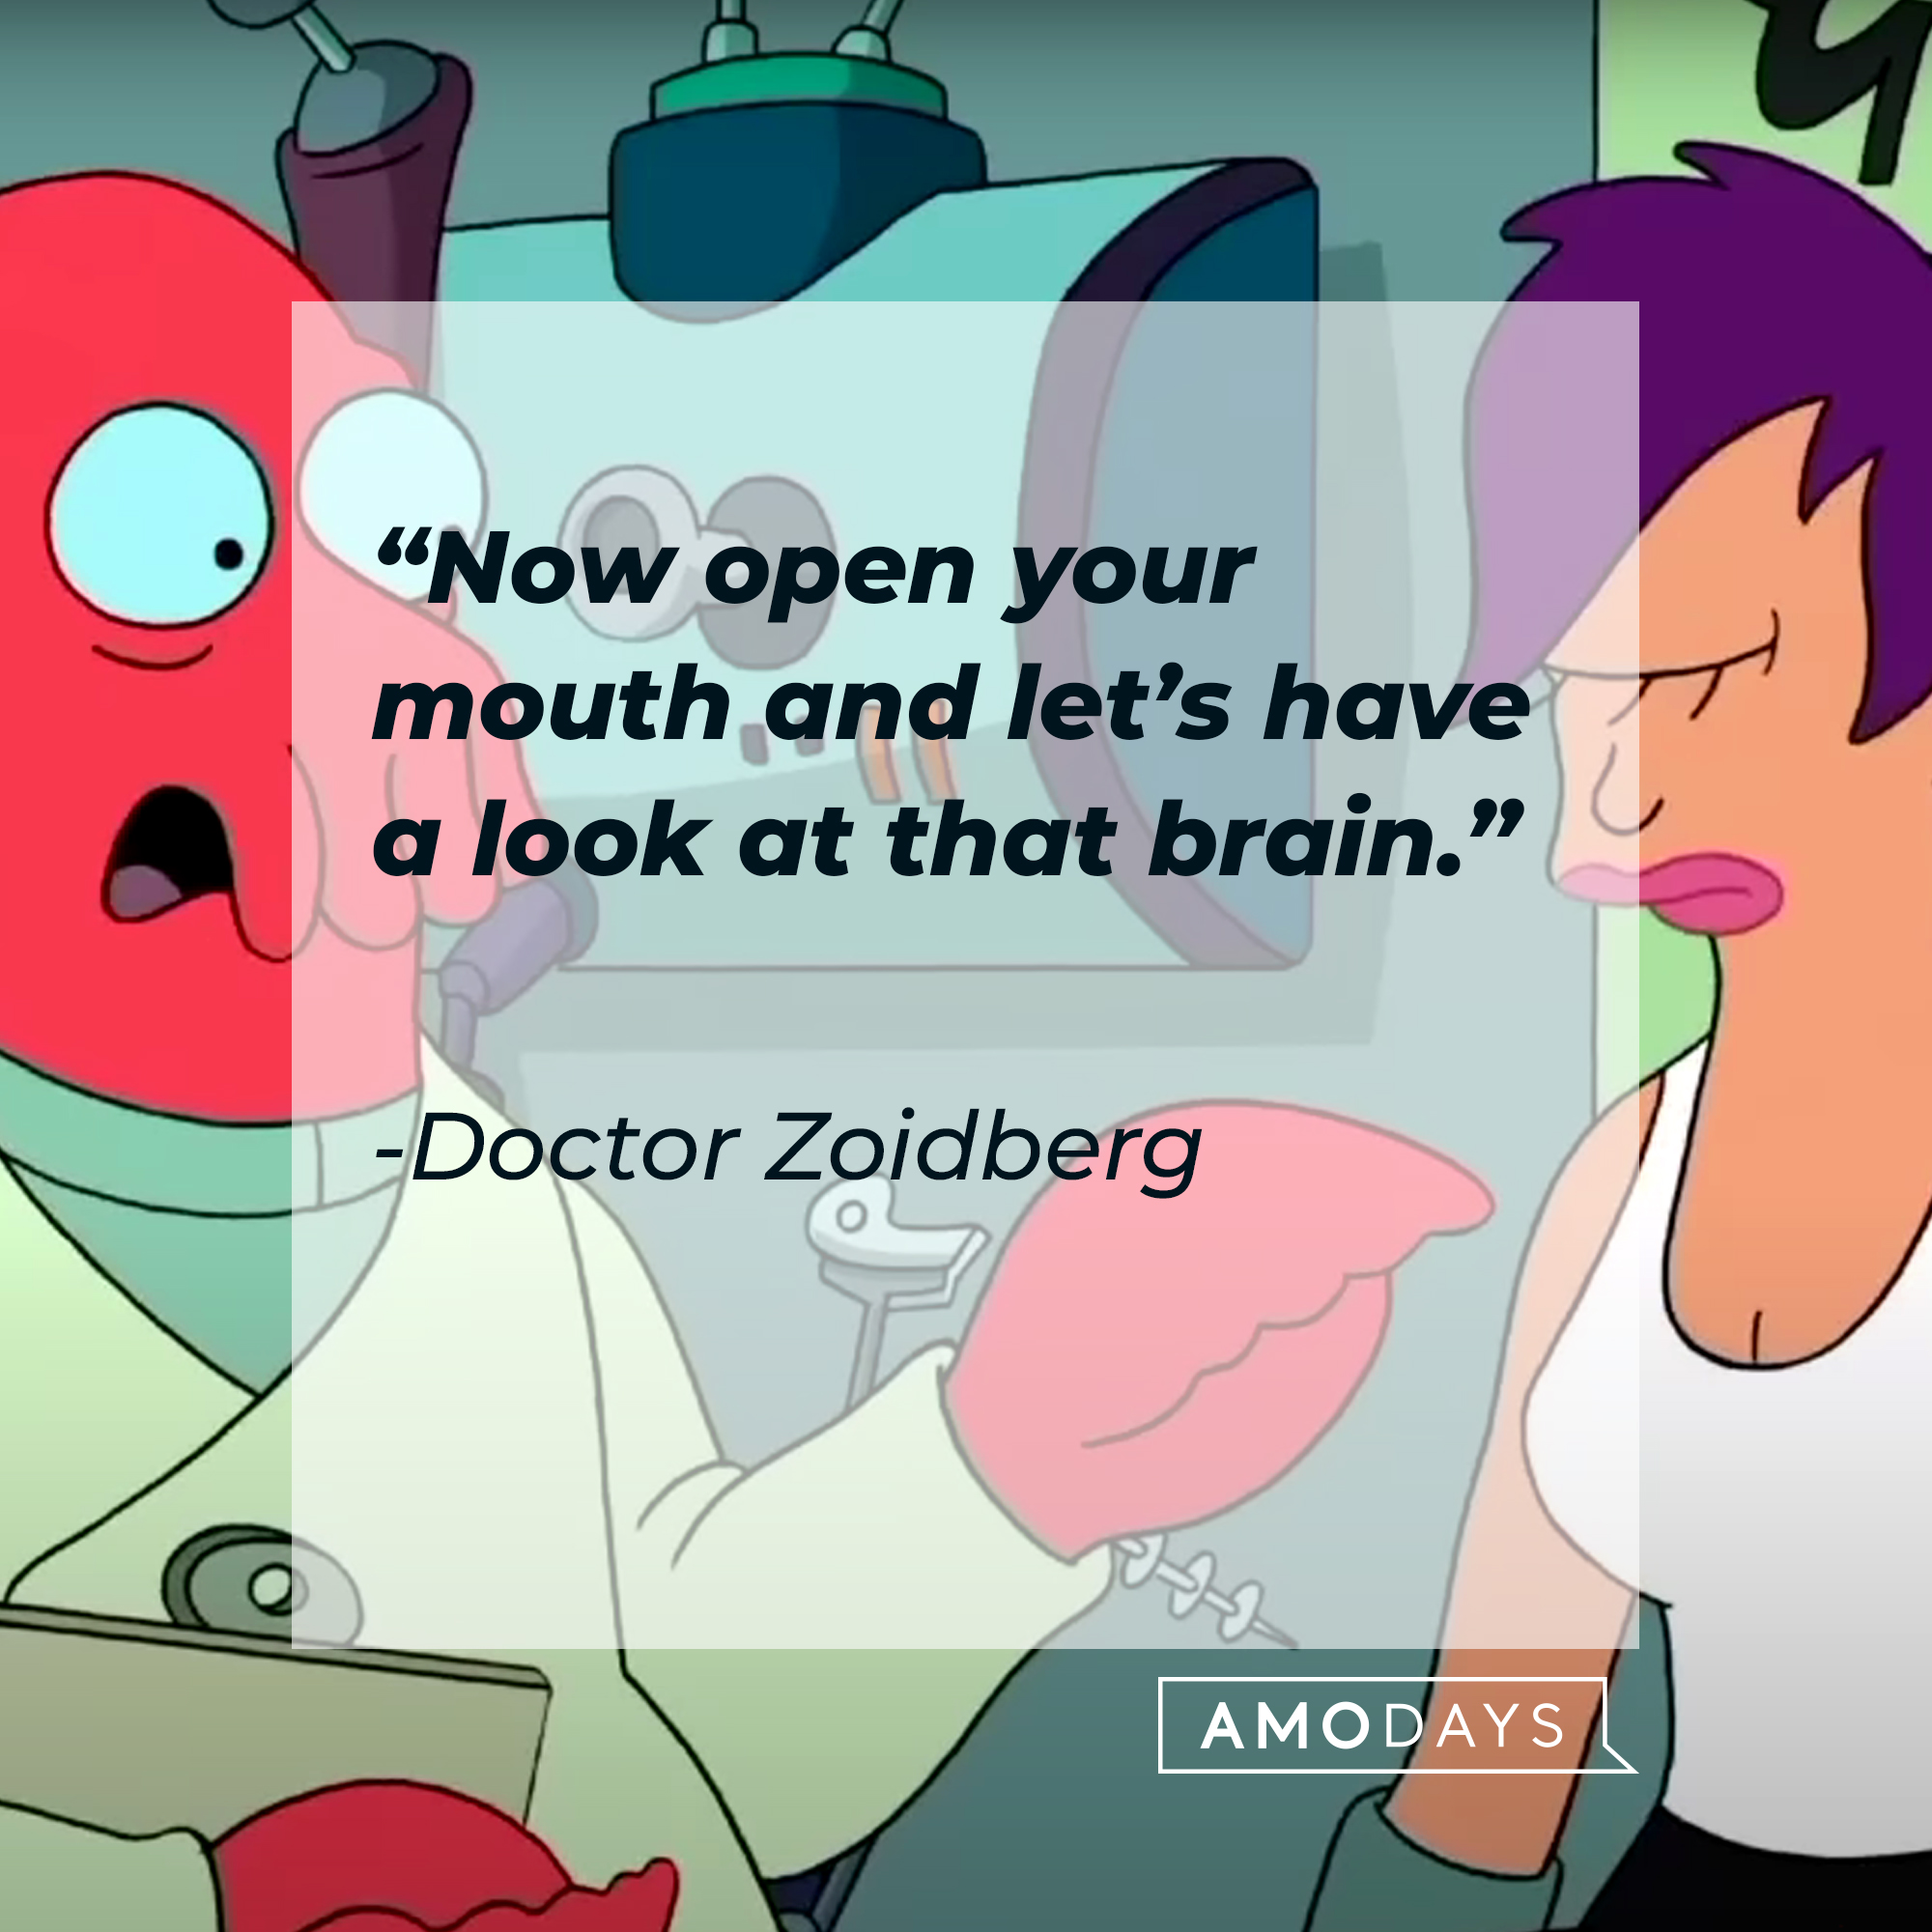 Doctor Zoidberg, with one other character and his quote: “Now open your mouth, and let's have a look at that brain.” | Source:  facebook.com/Futurama